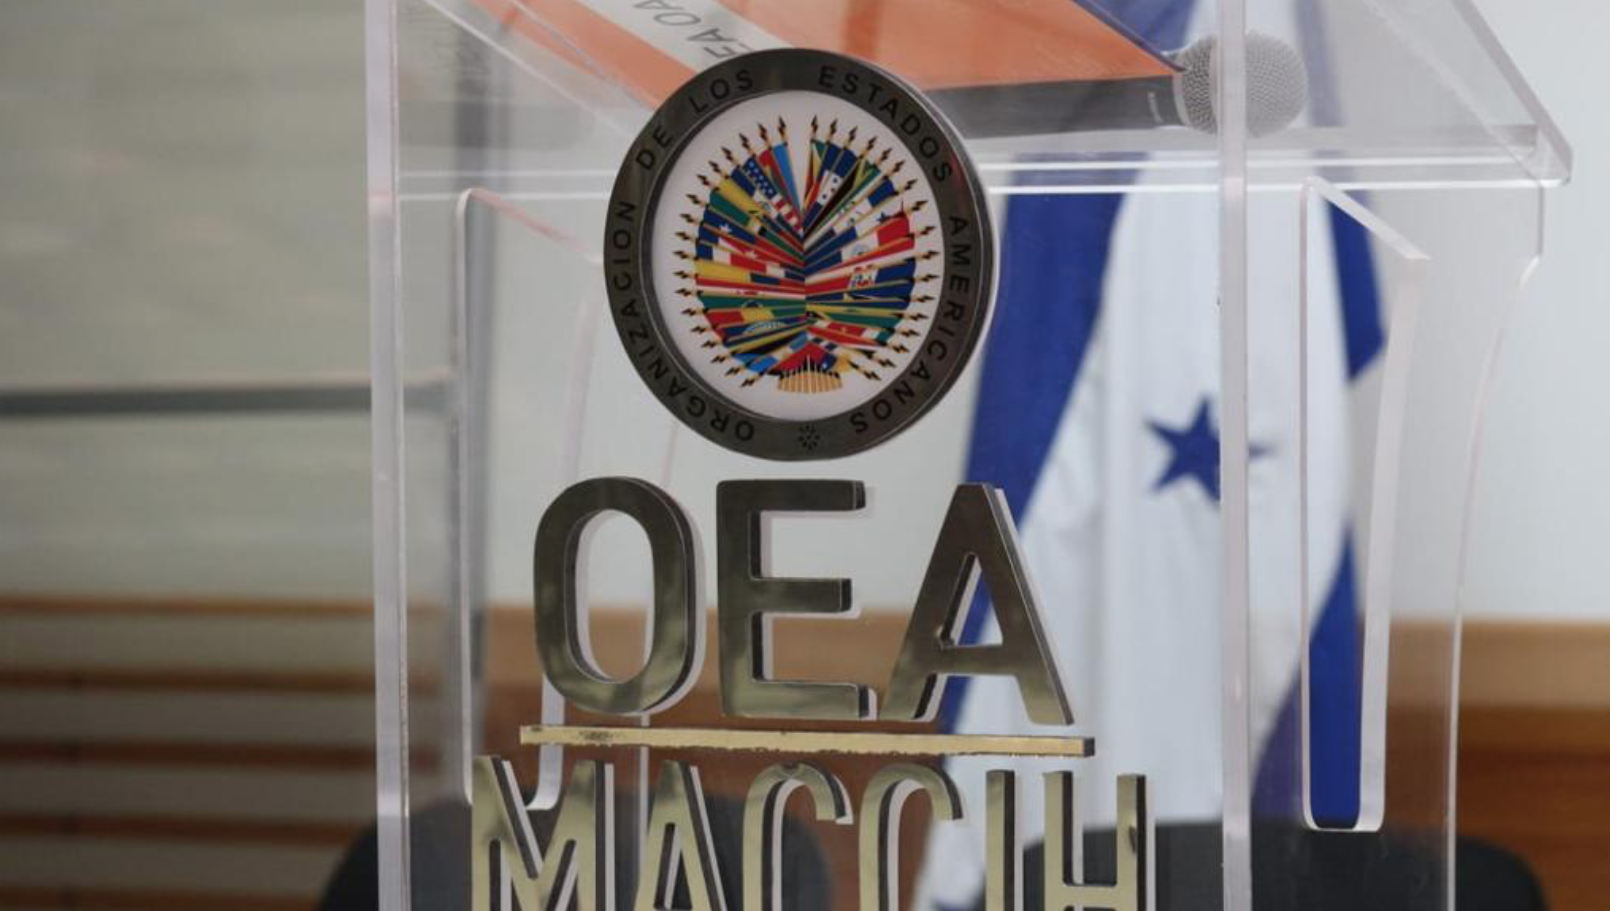 The MACCIH was created by the OAS to look into allegations of political corruption in Honduras. Image by MACCIH/Twitter.